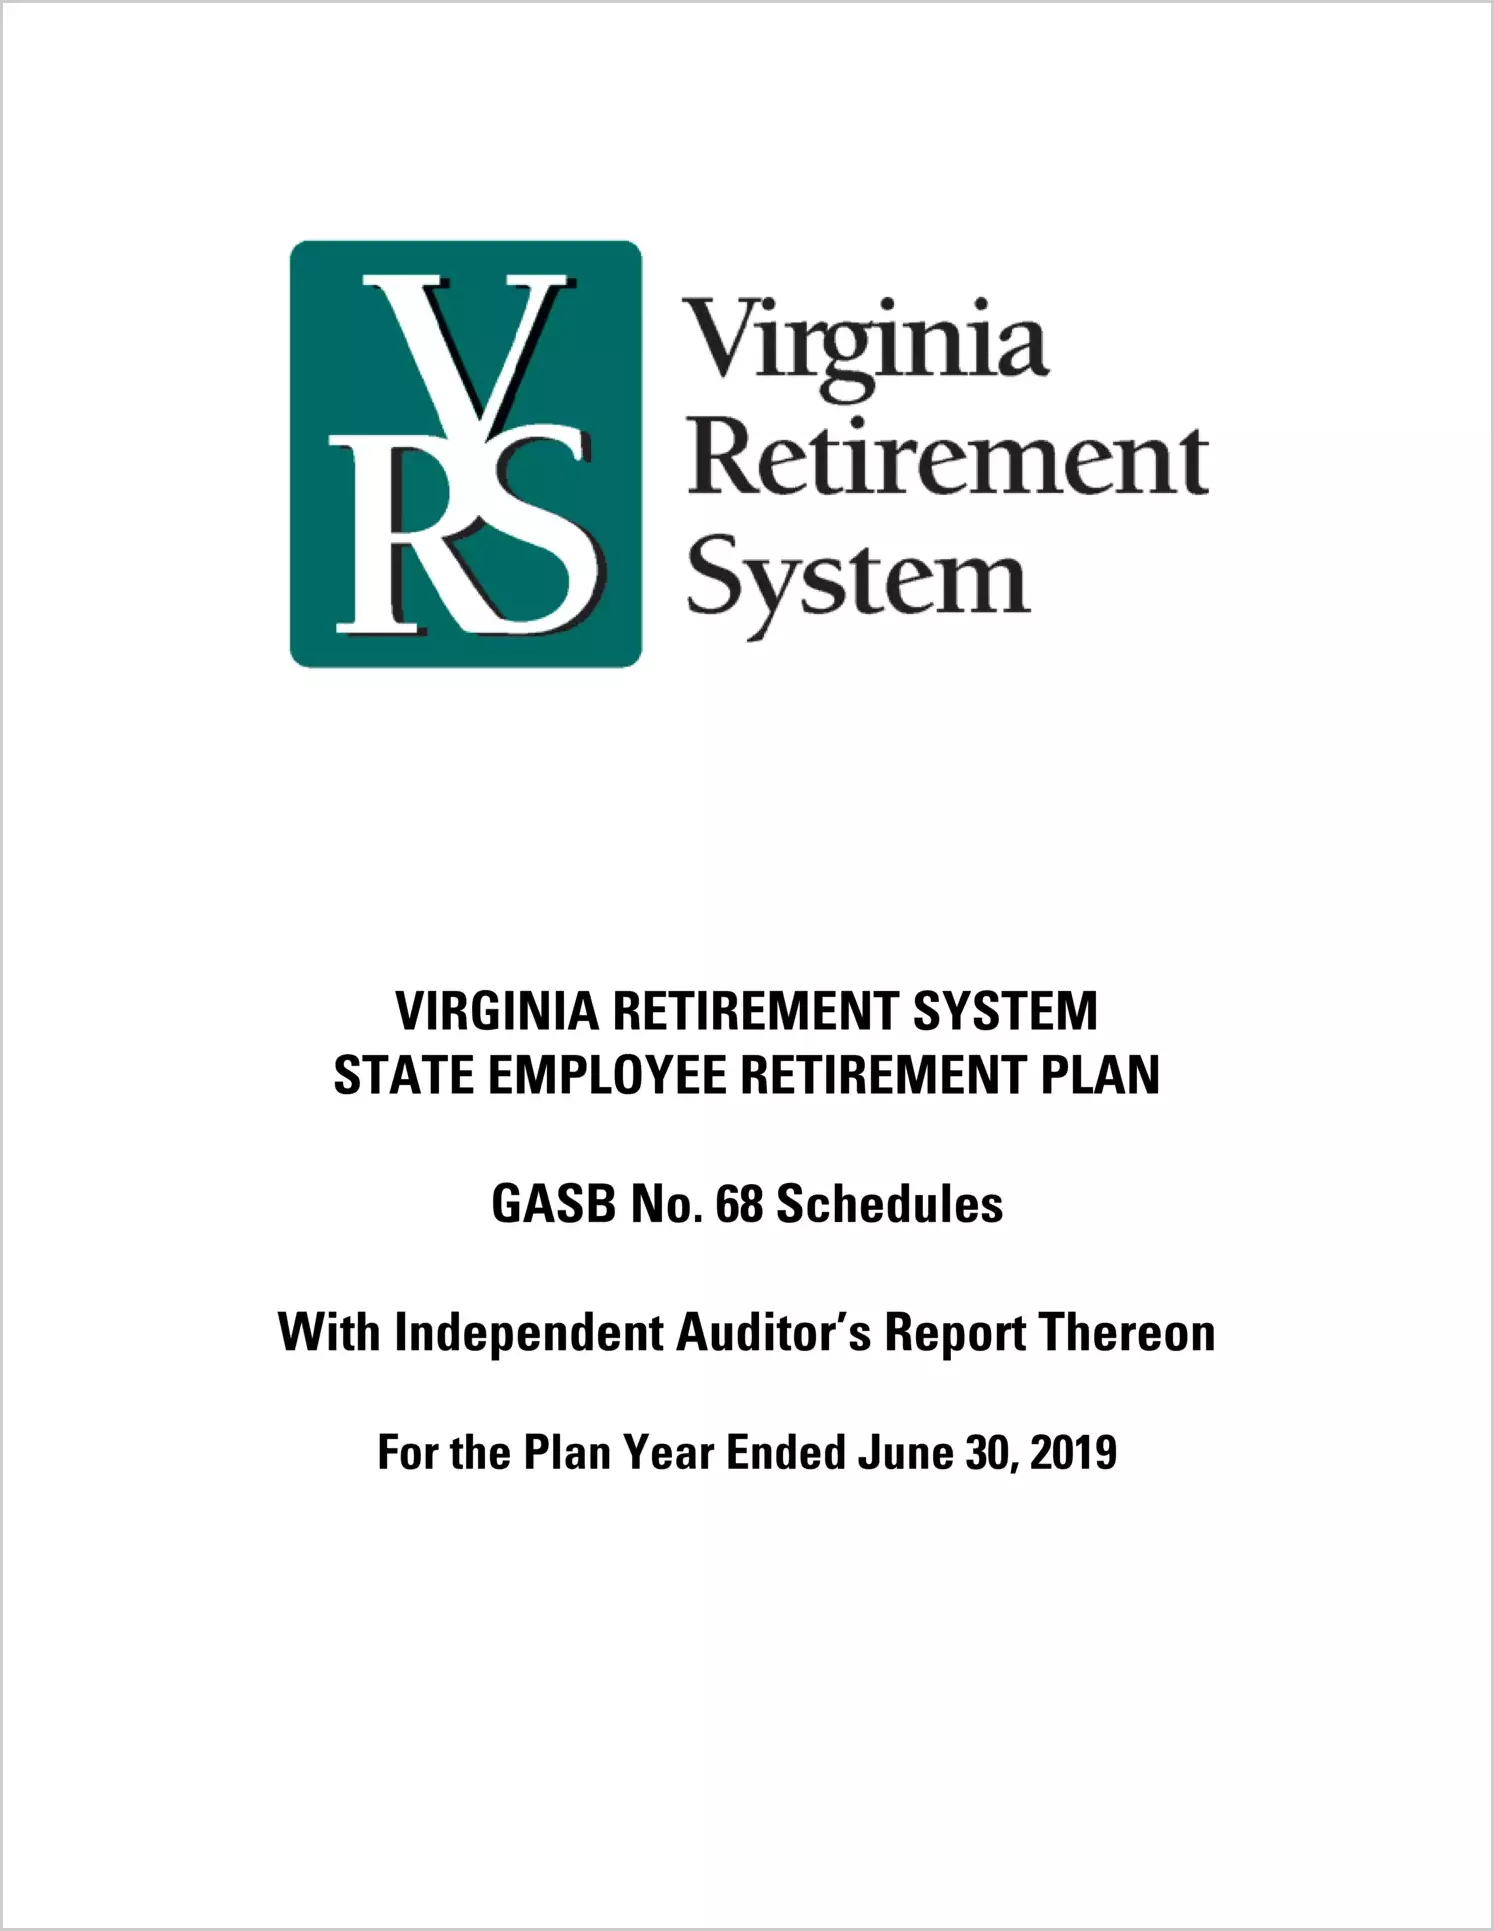 GASB 68 Schedule - Virginia Retirement System State Employee Retirement Plan for the year ended June 30, 2019